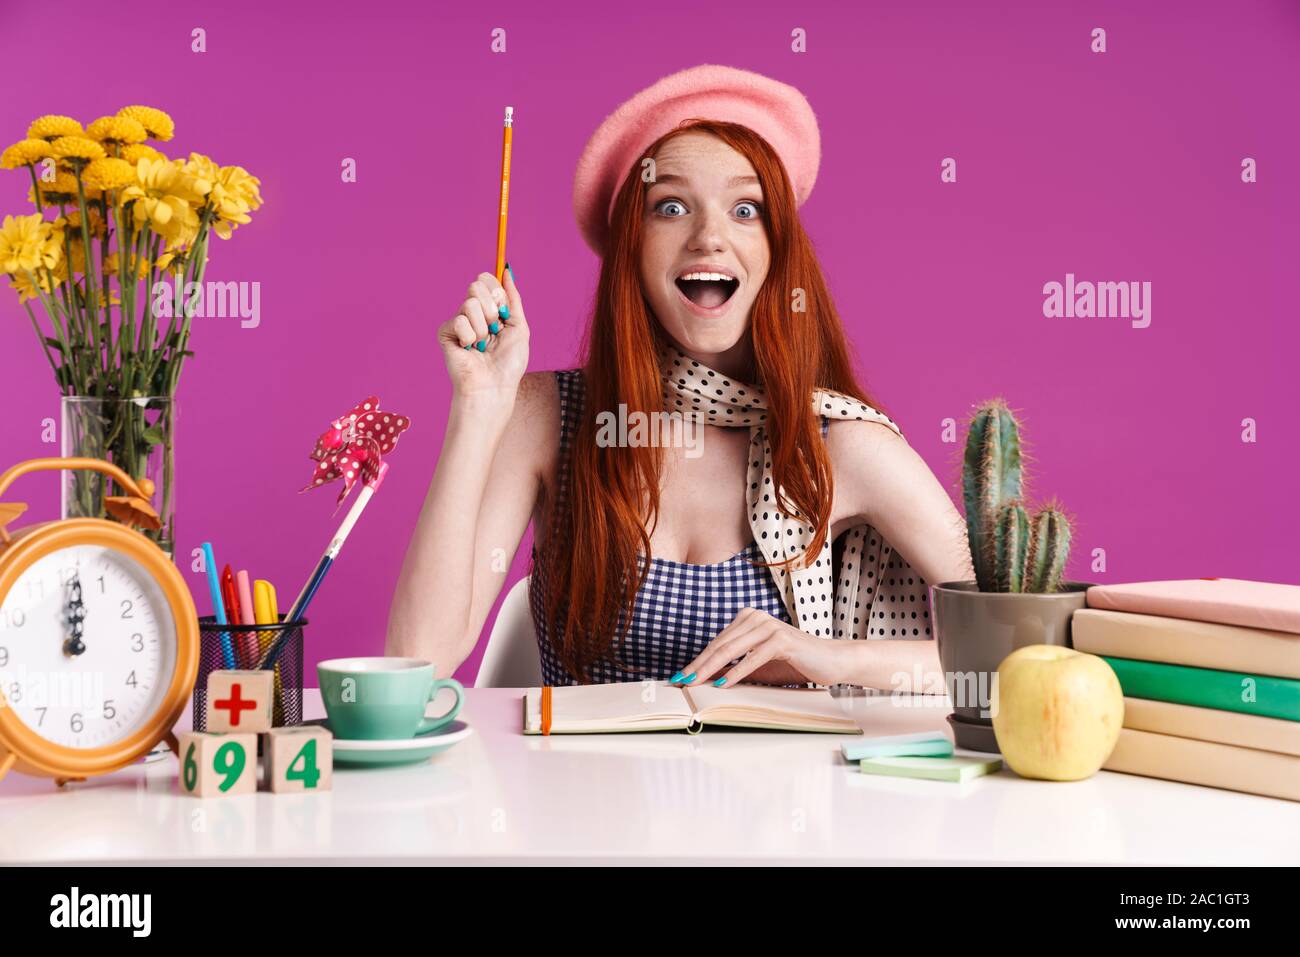 Image Of Excited Teenage Girl Studying With Exercise Books While